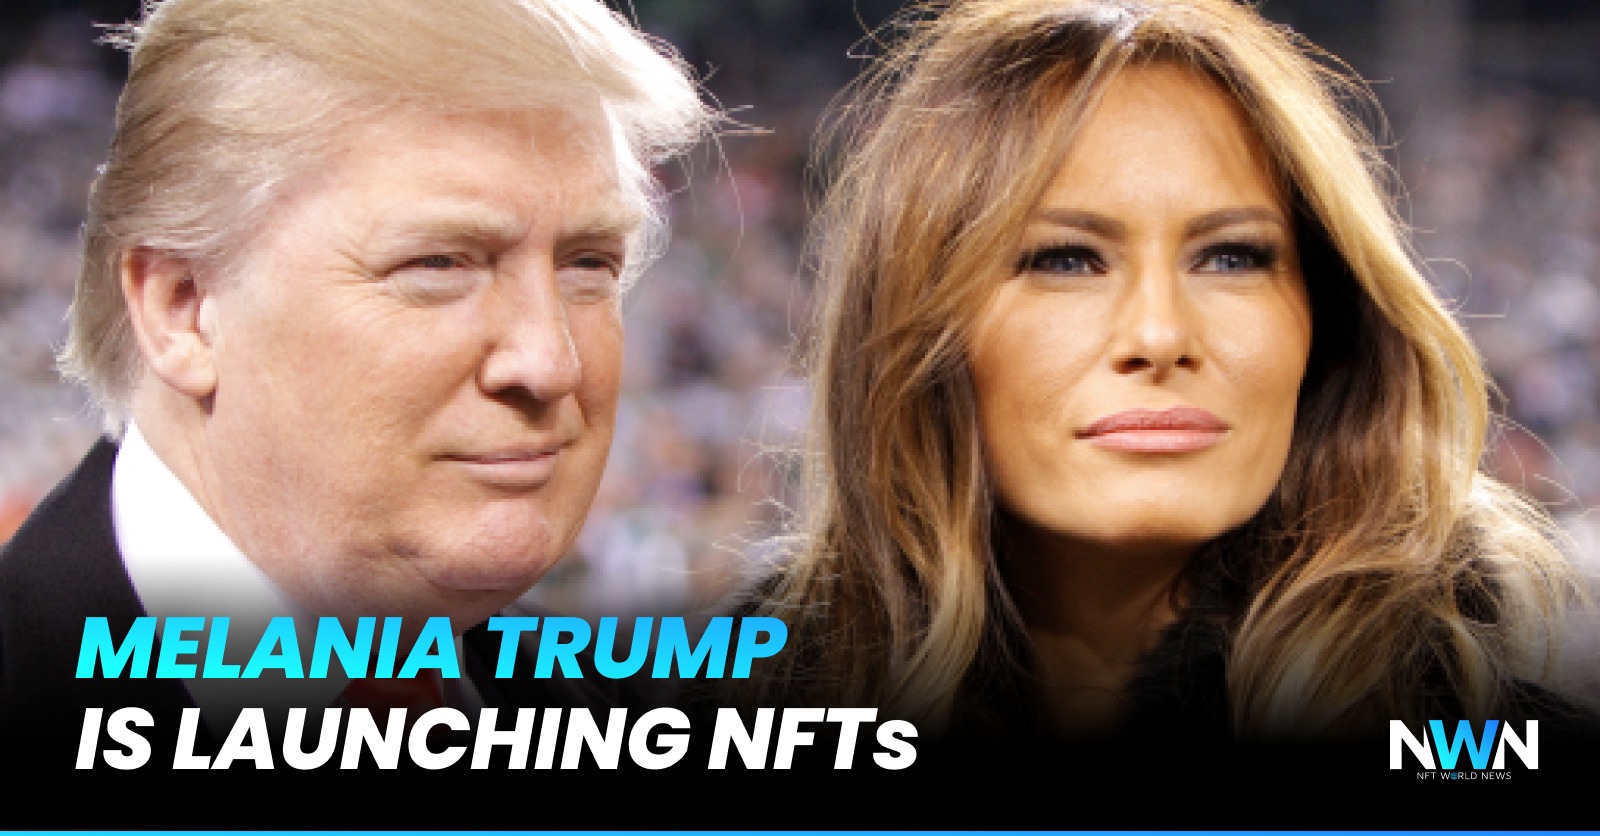 Melania Trump Is Launching NFTs About Trump's “Iconic” Moments